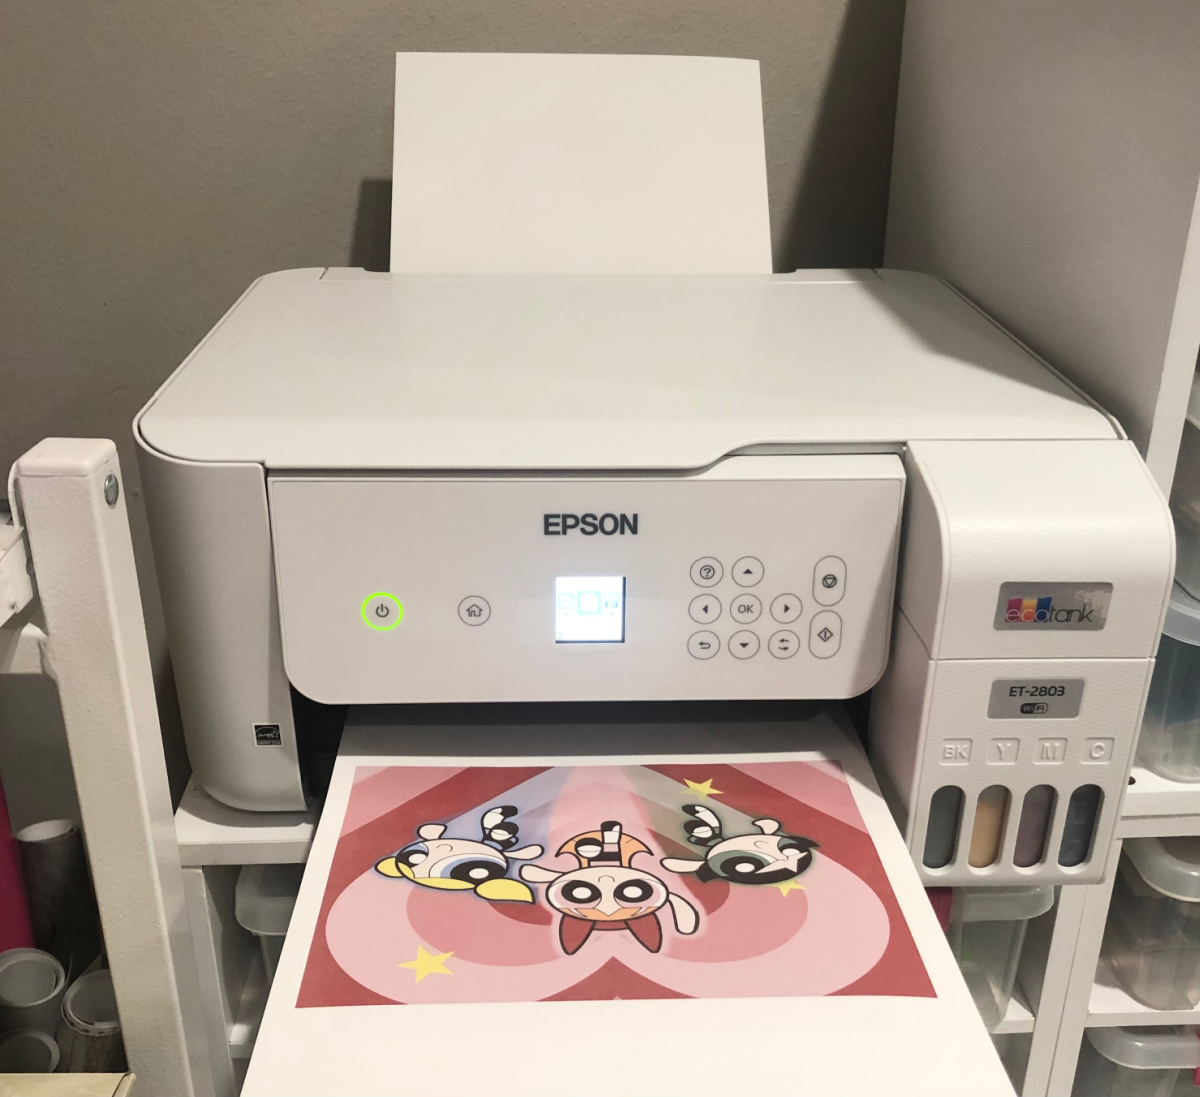 Epson Printer with sublimation printed out on printer tray